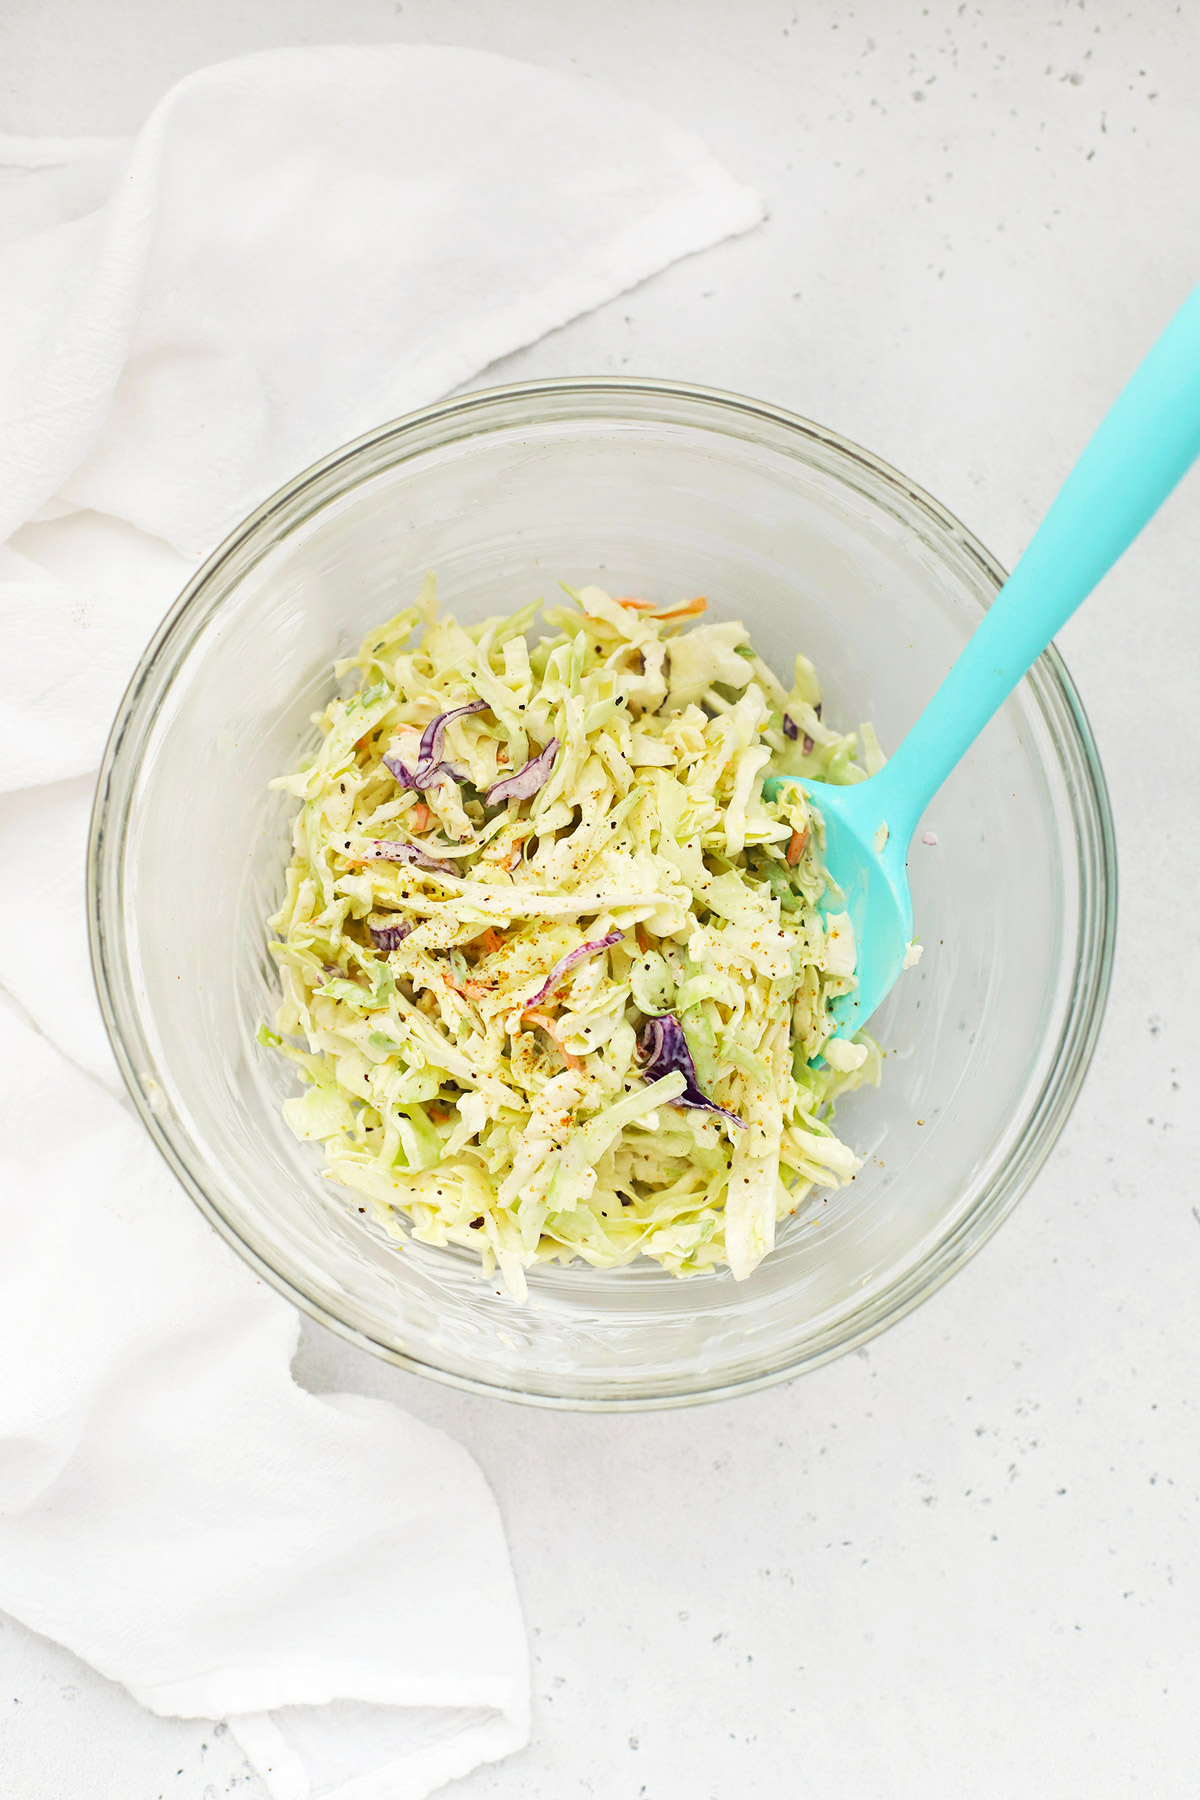 Overhead view of a bowl of coleslaw on a white background